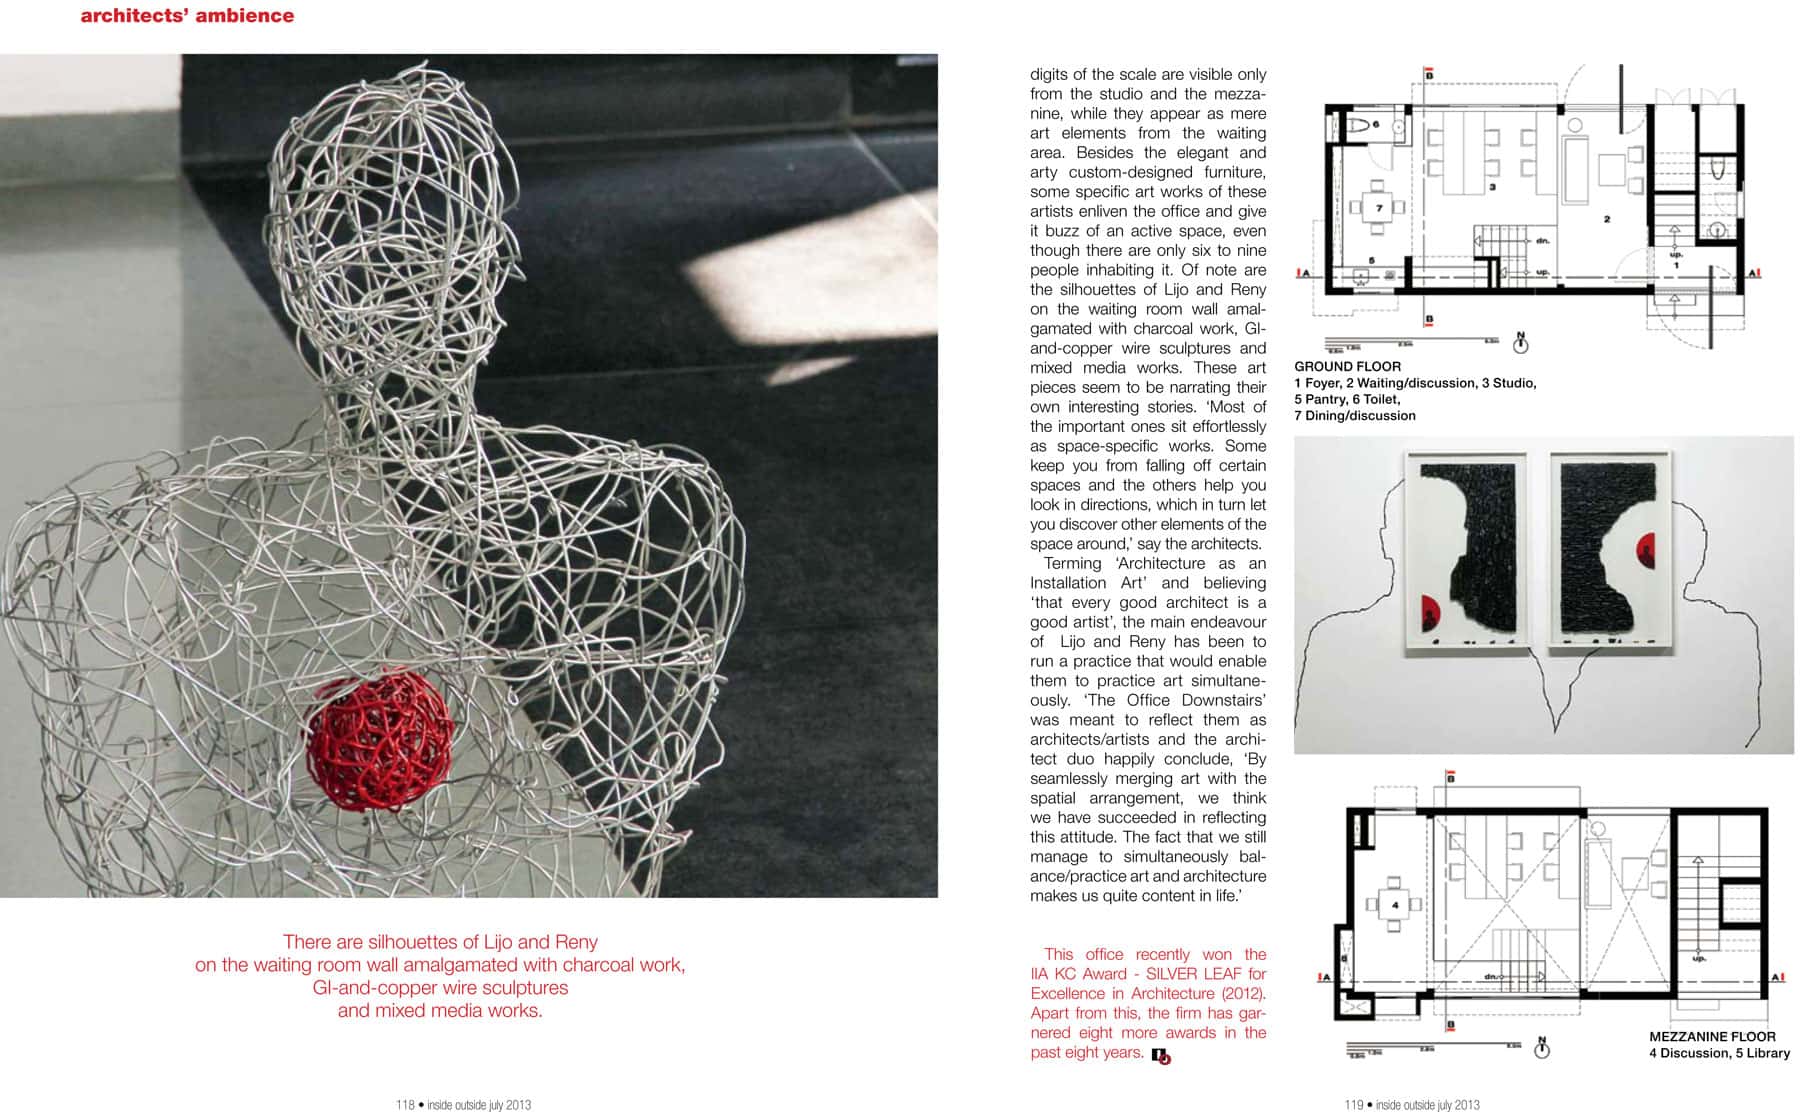 inside-outside-magazine-india-feature-the-studio-of-lijo-reny-architects-4